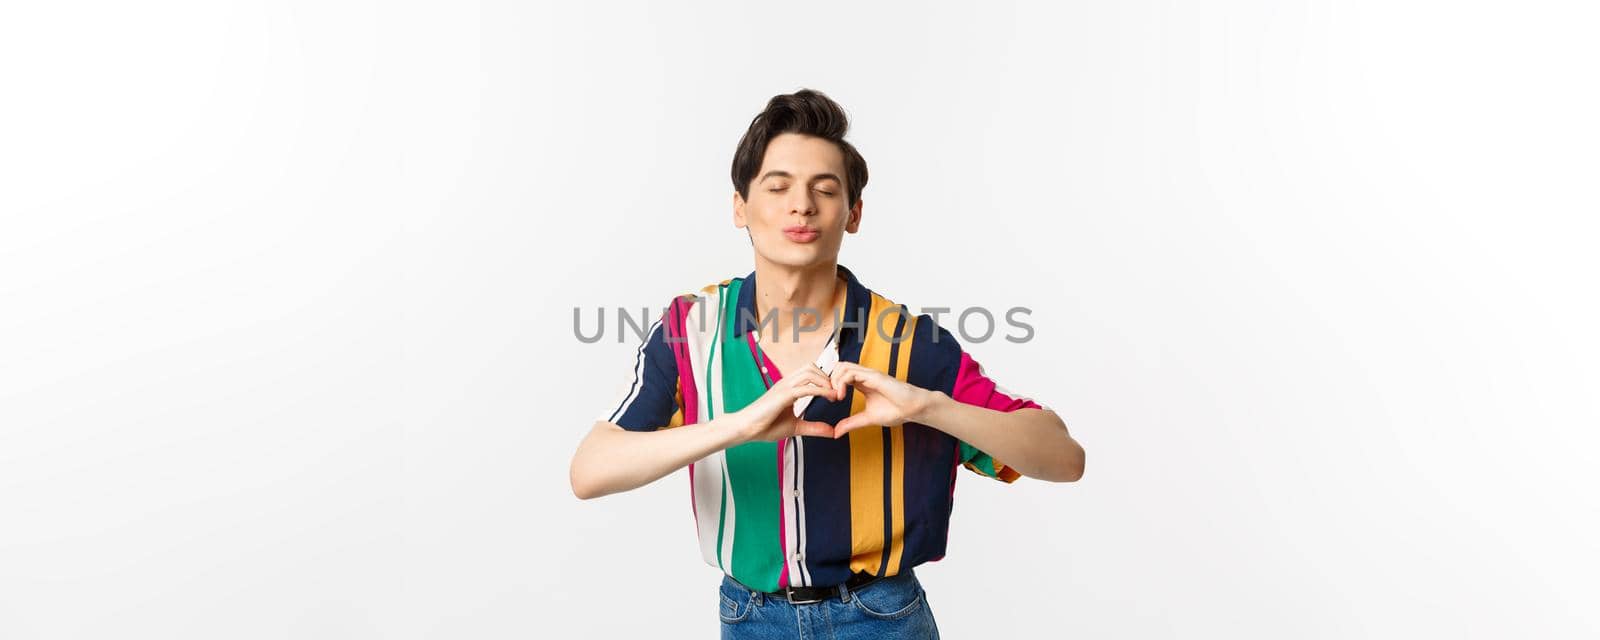 Lovely young man pucker lips and showing heart sign, waiting for kiss, I love you gesture, standing over white background.